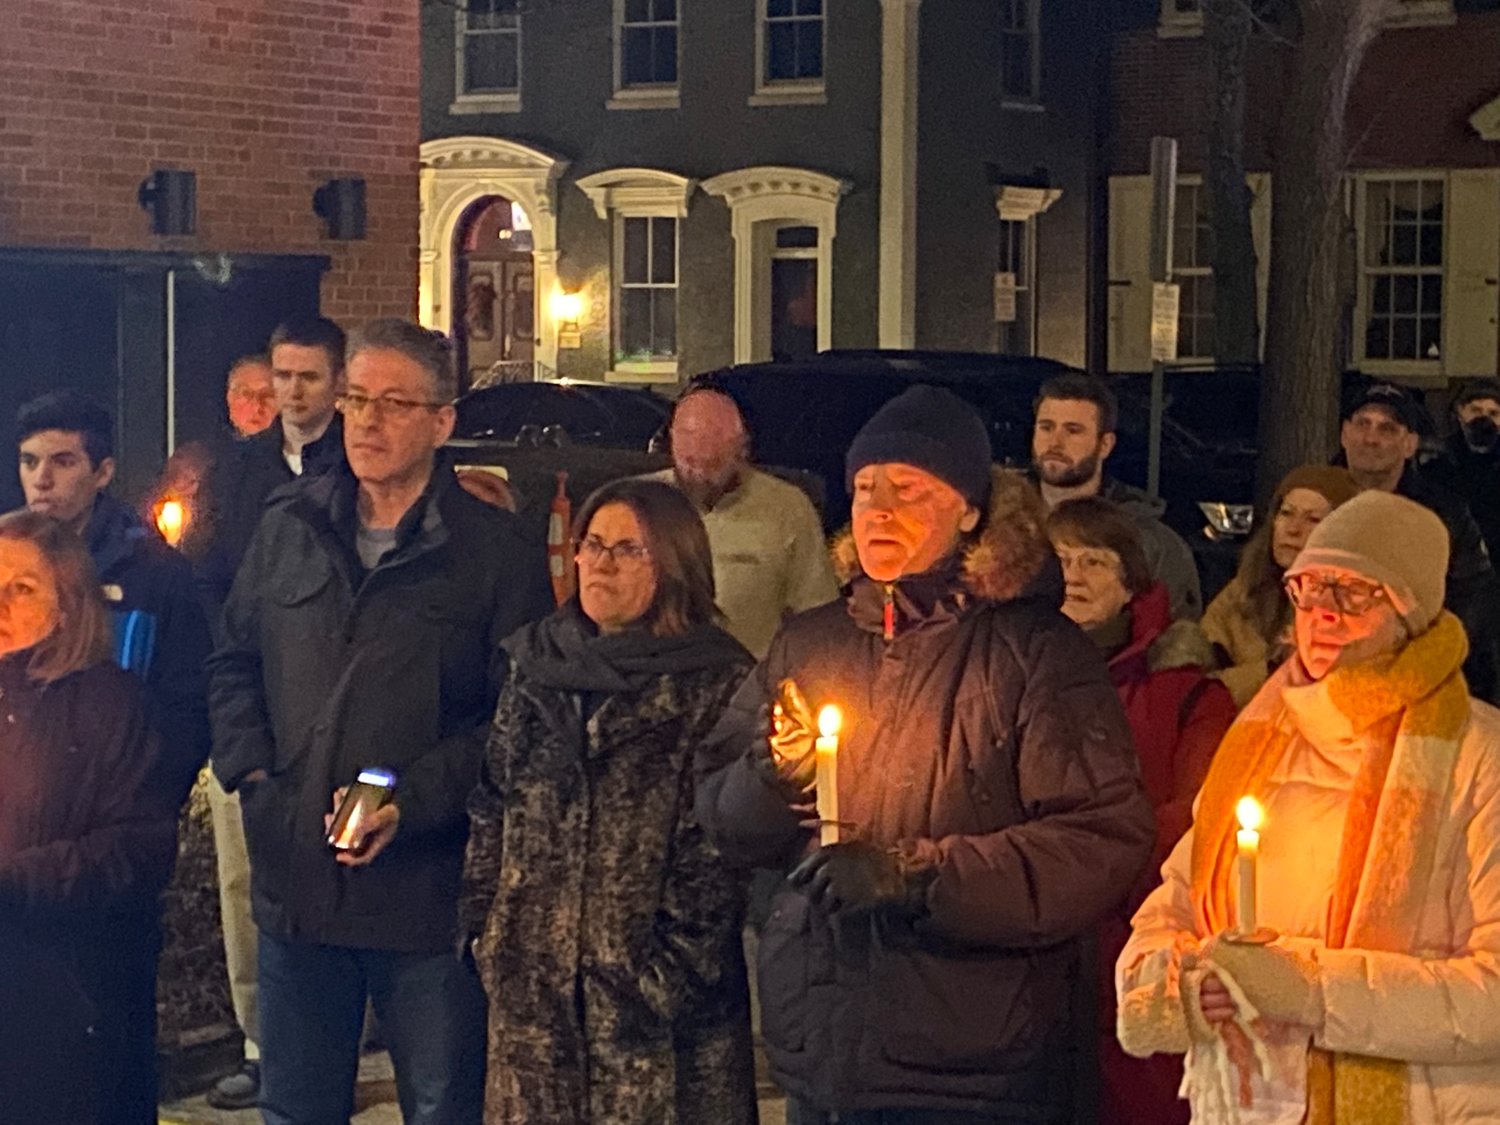 The “Vigil for Democracy” on Jan.6 drew several dozen people to the former Bucks County Courthouse in Doylestown to mark the second anniversary of the insurrection.